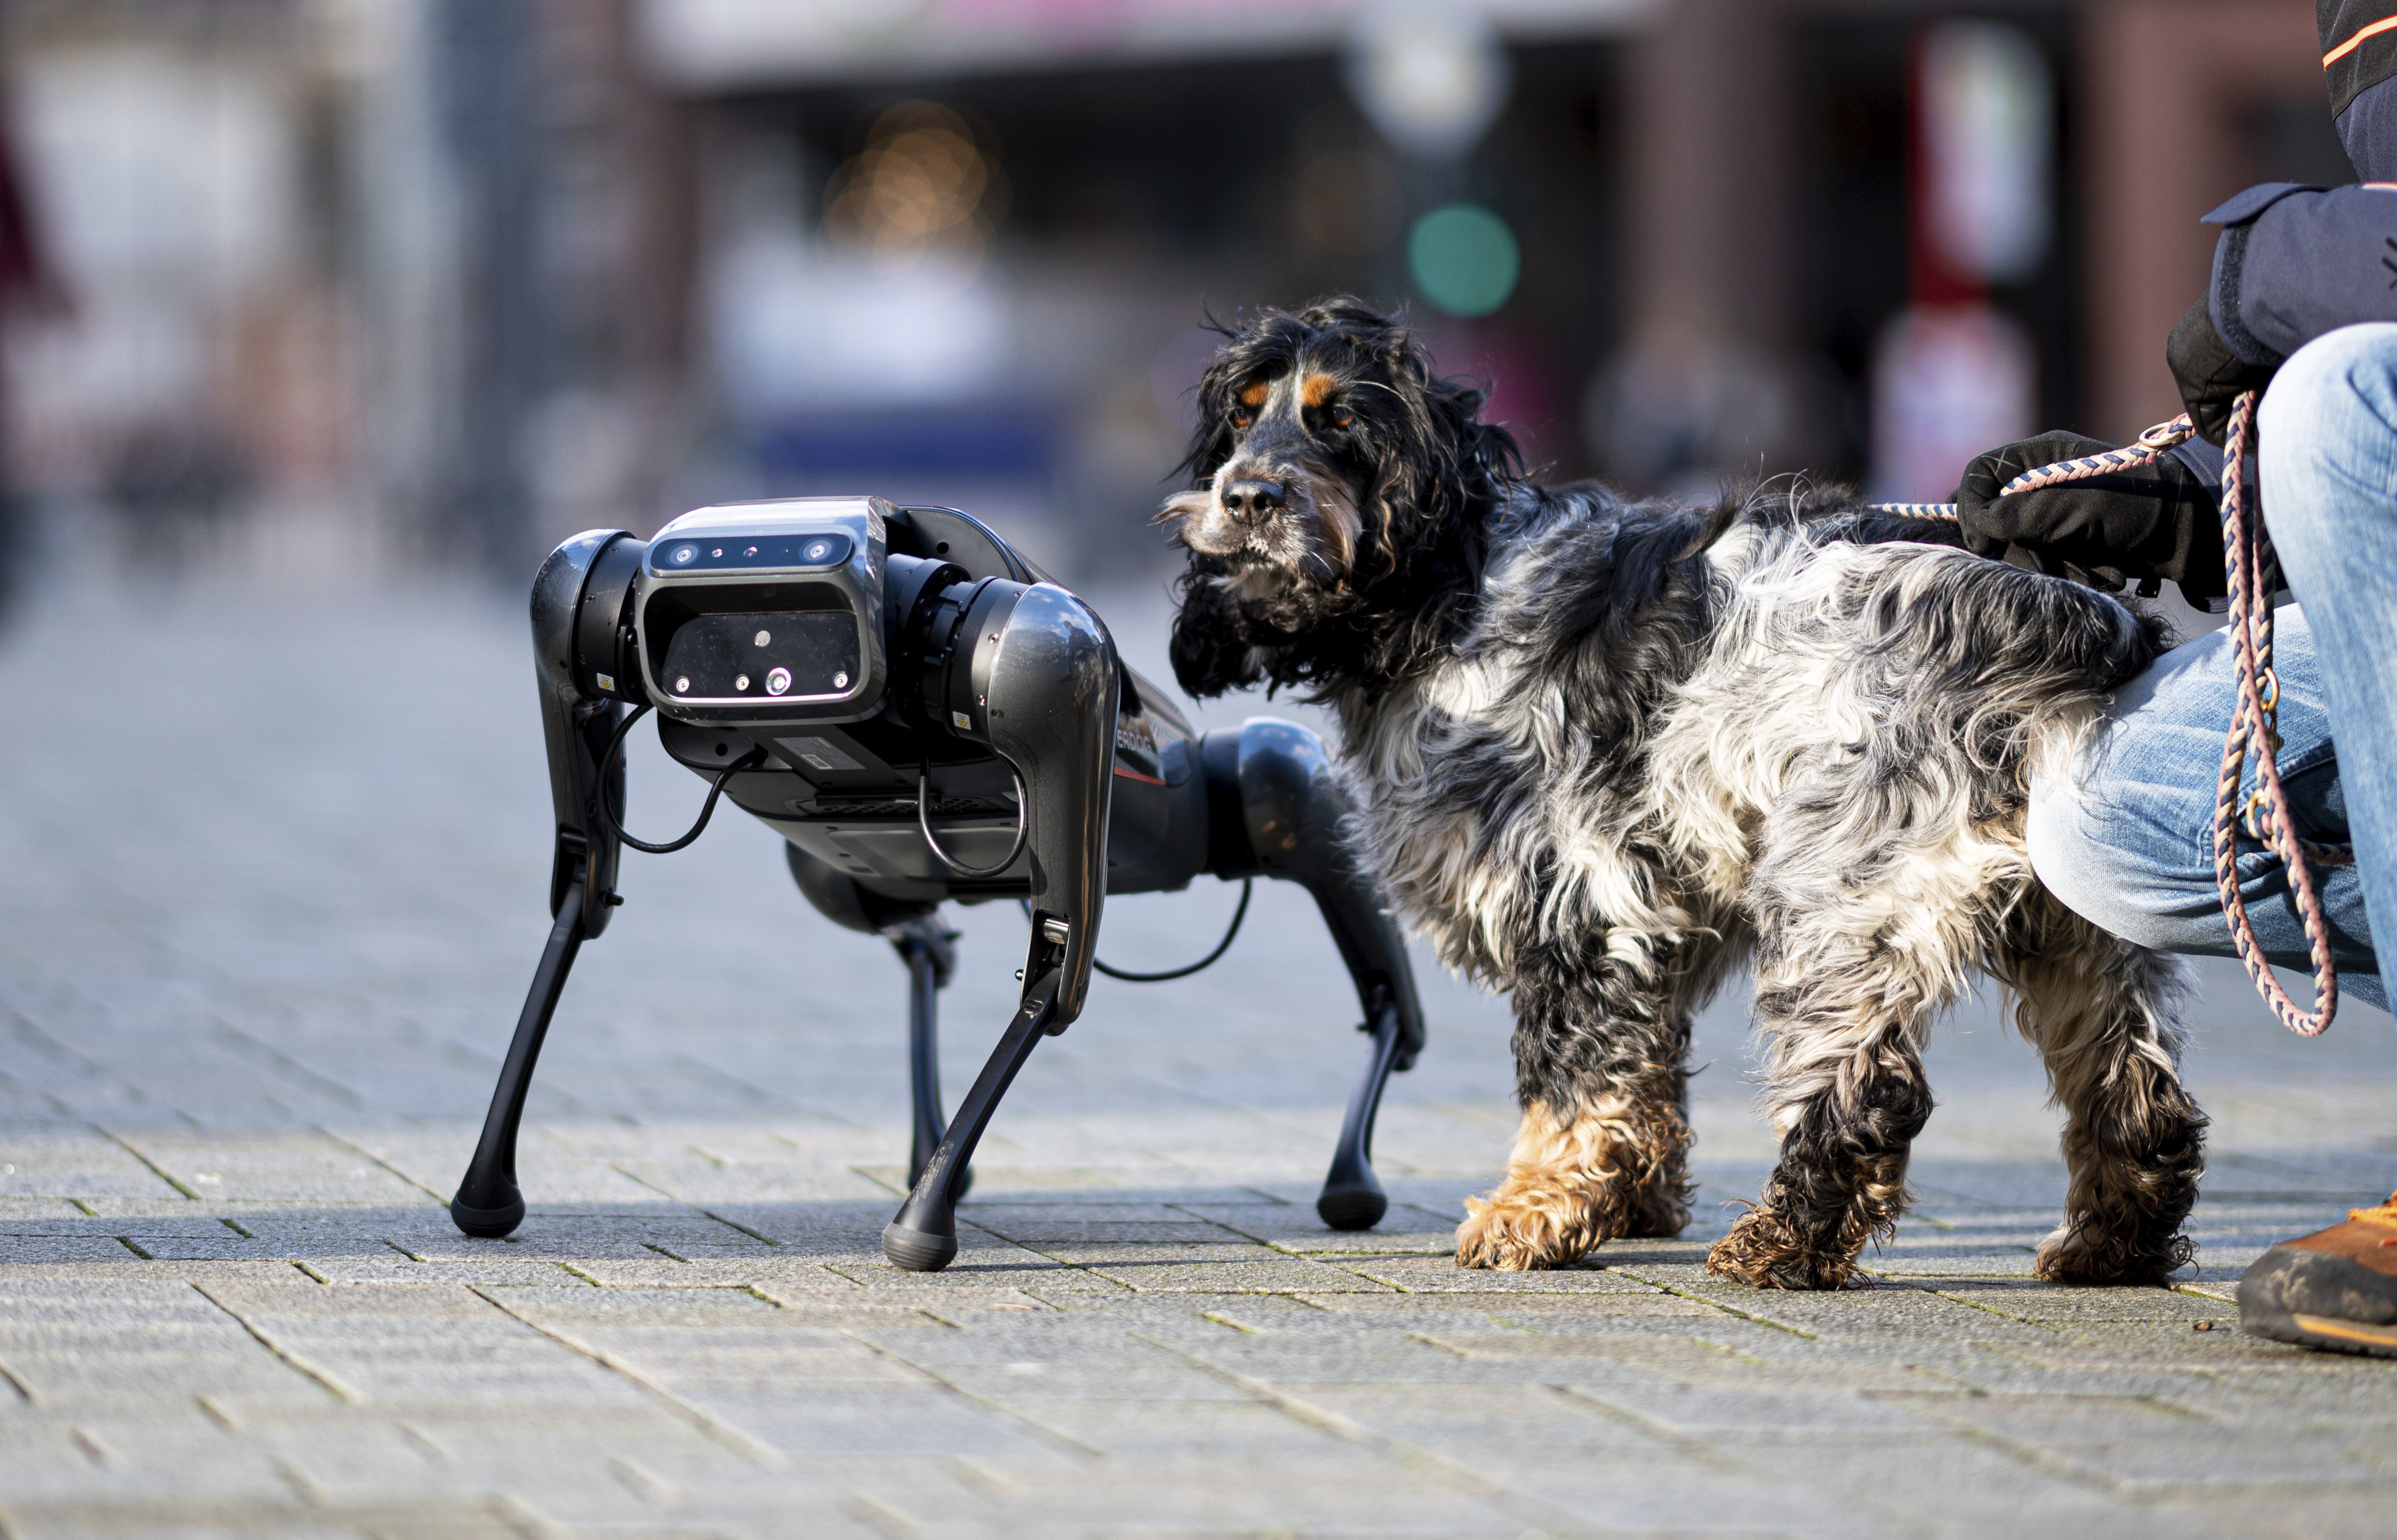 Mobile World Congress 2022: Cyberdog: Meet the robot canine from Xiaomi  that's programed to be man's best friend | Science & Tech | EL PAÍS English  Edition